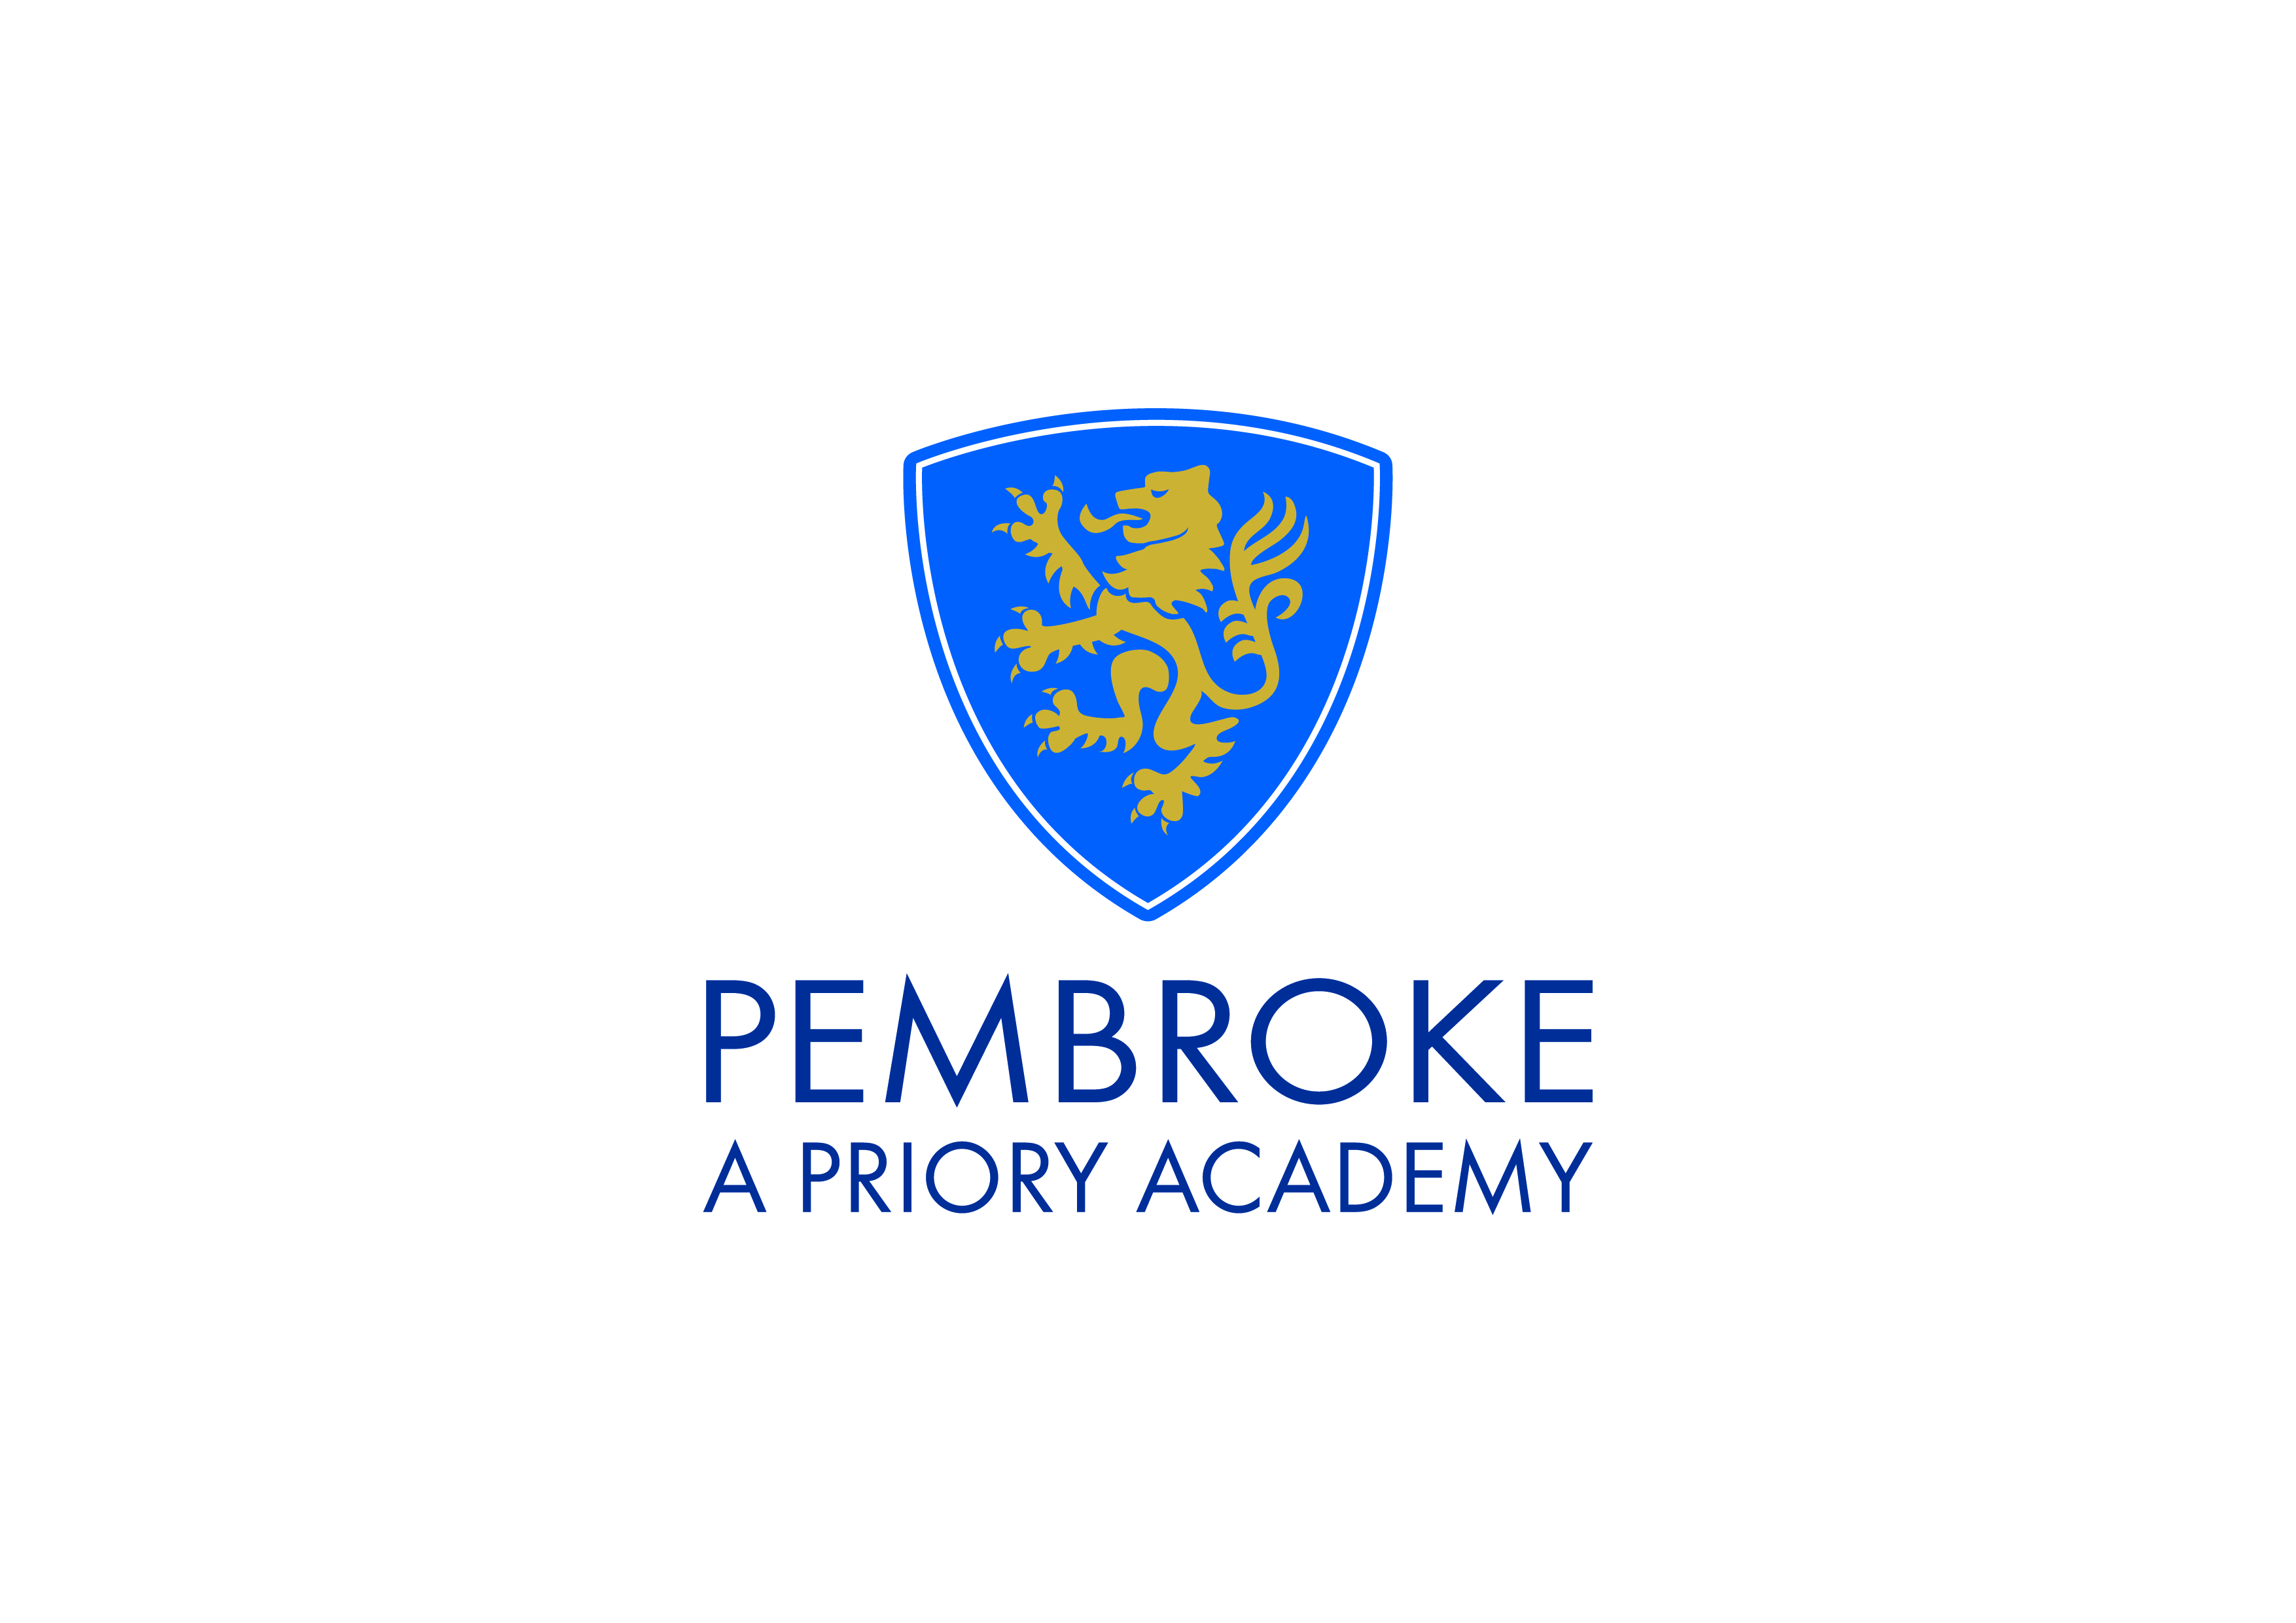 The logo of The Priory Pembroke Academy.